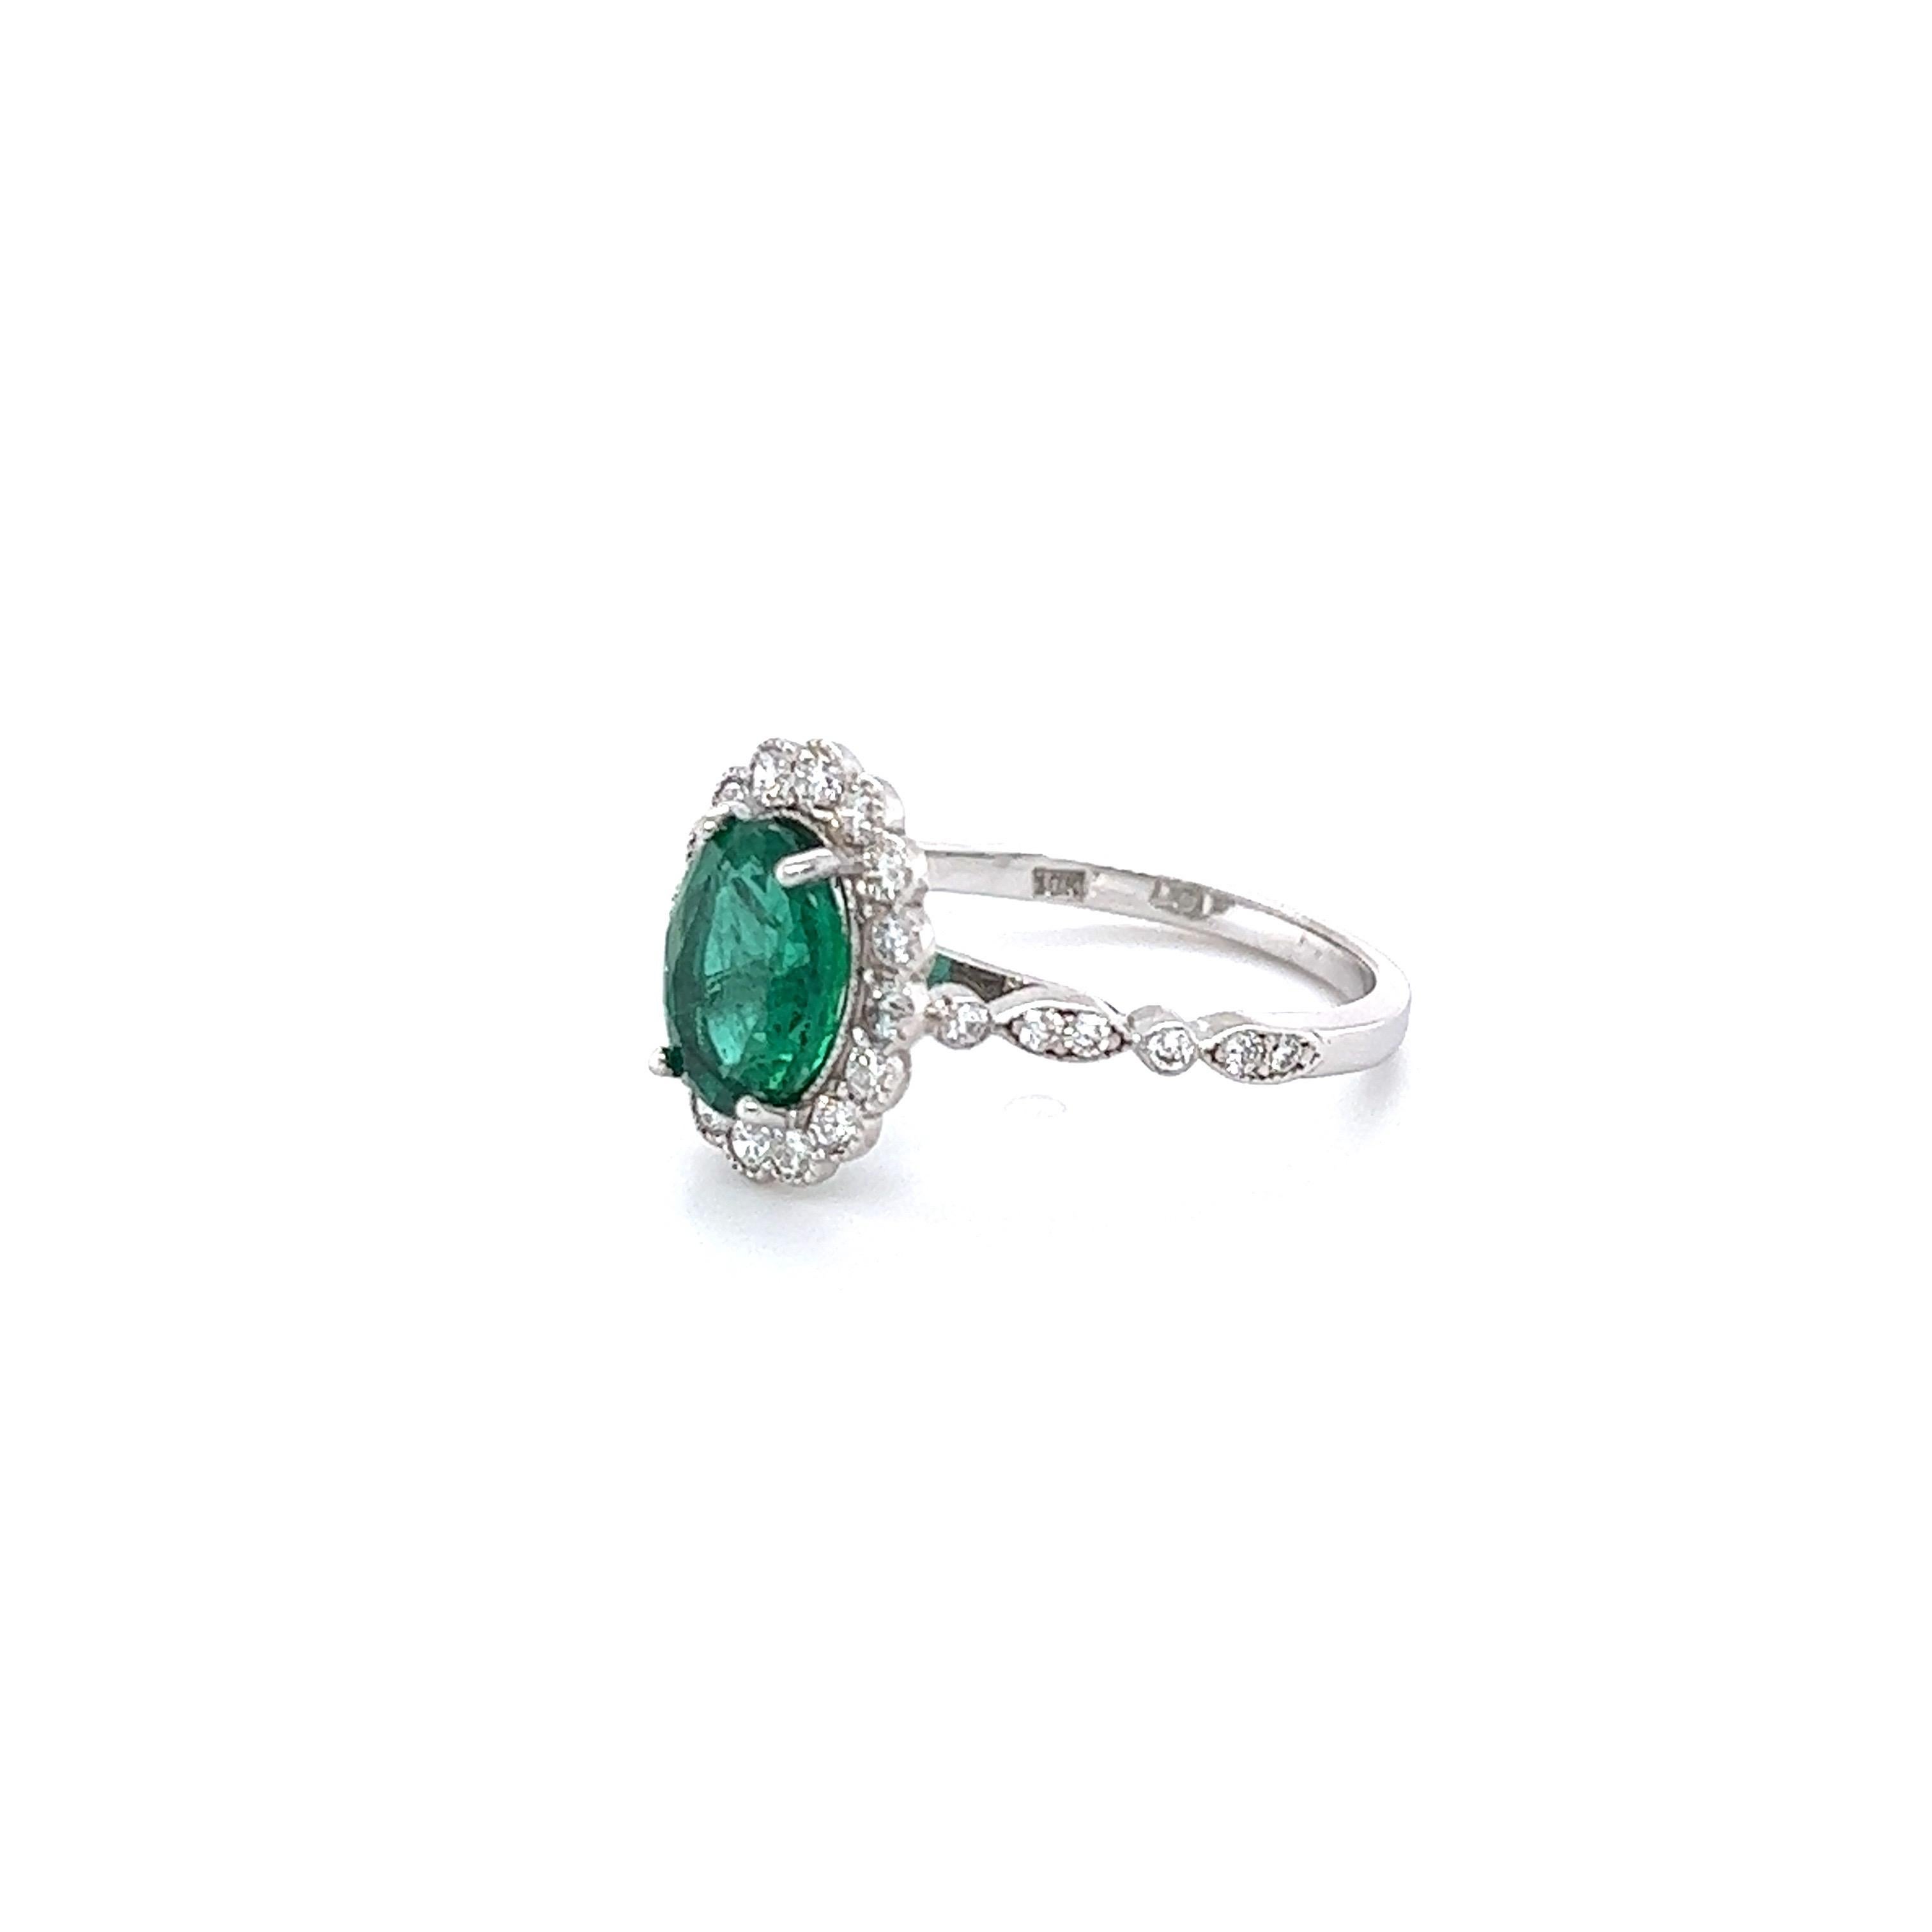 Contemporary GIA Certified 2.22 Carat Natural Emerald Diamond White Gold Engagement Ring